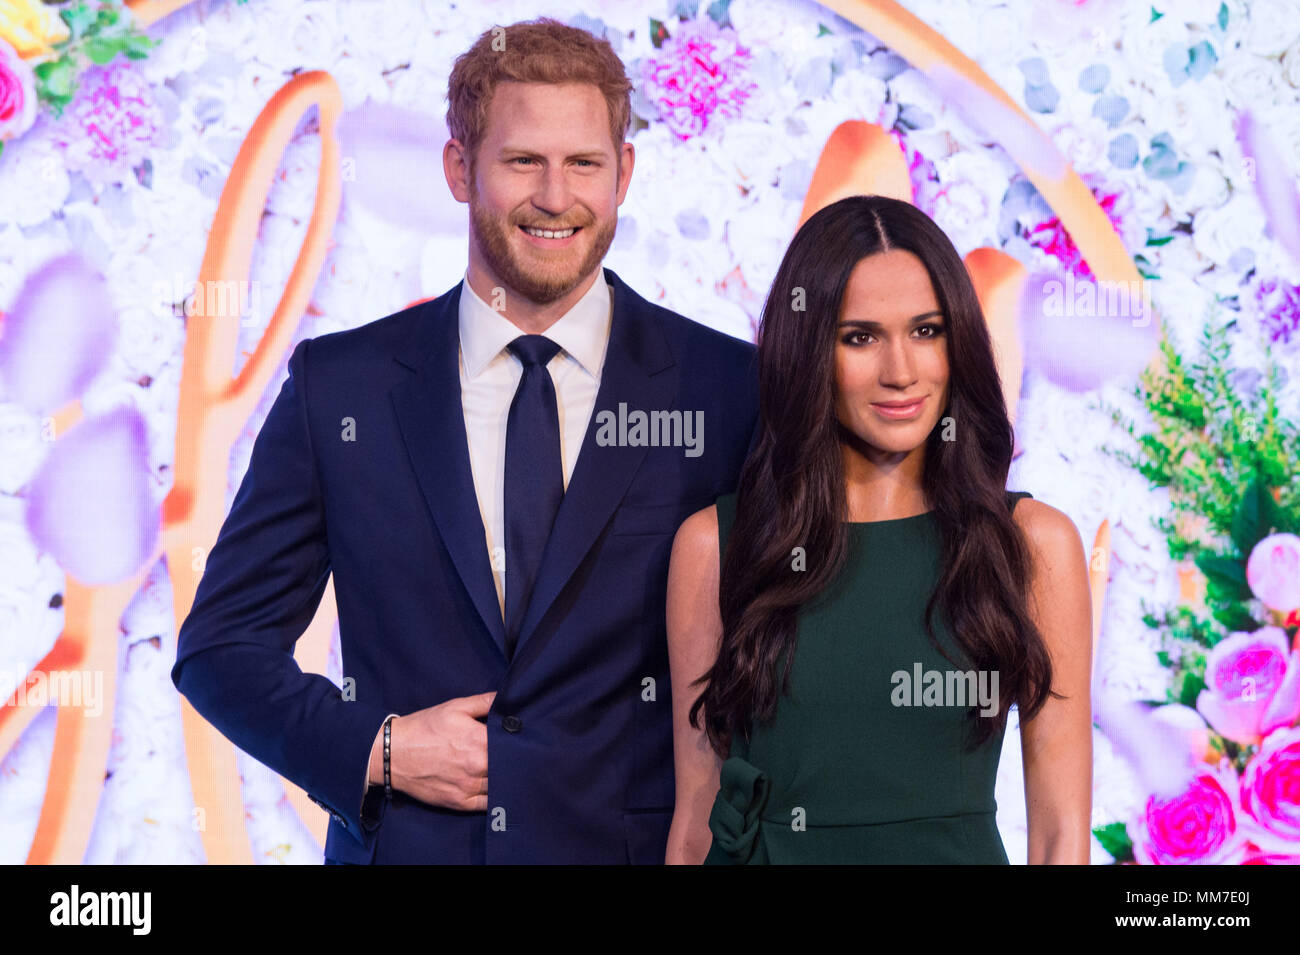 London, UK. 9th May, 2018. Photo taken on May 9, 2018 shows wax figures of Meghan Markle and Prince Harry at Madame Tussauds in London, Britain. A new wax figure of Meghan Markle was unveiled ahead of her wedding to Prince Harry on May 19 at Madame Tussauds London on Wednesday. Credit: Ray Tang/Xinhua/Alamy Live News Stock Photo